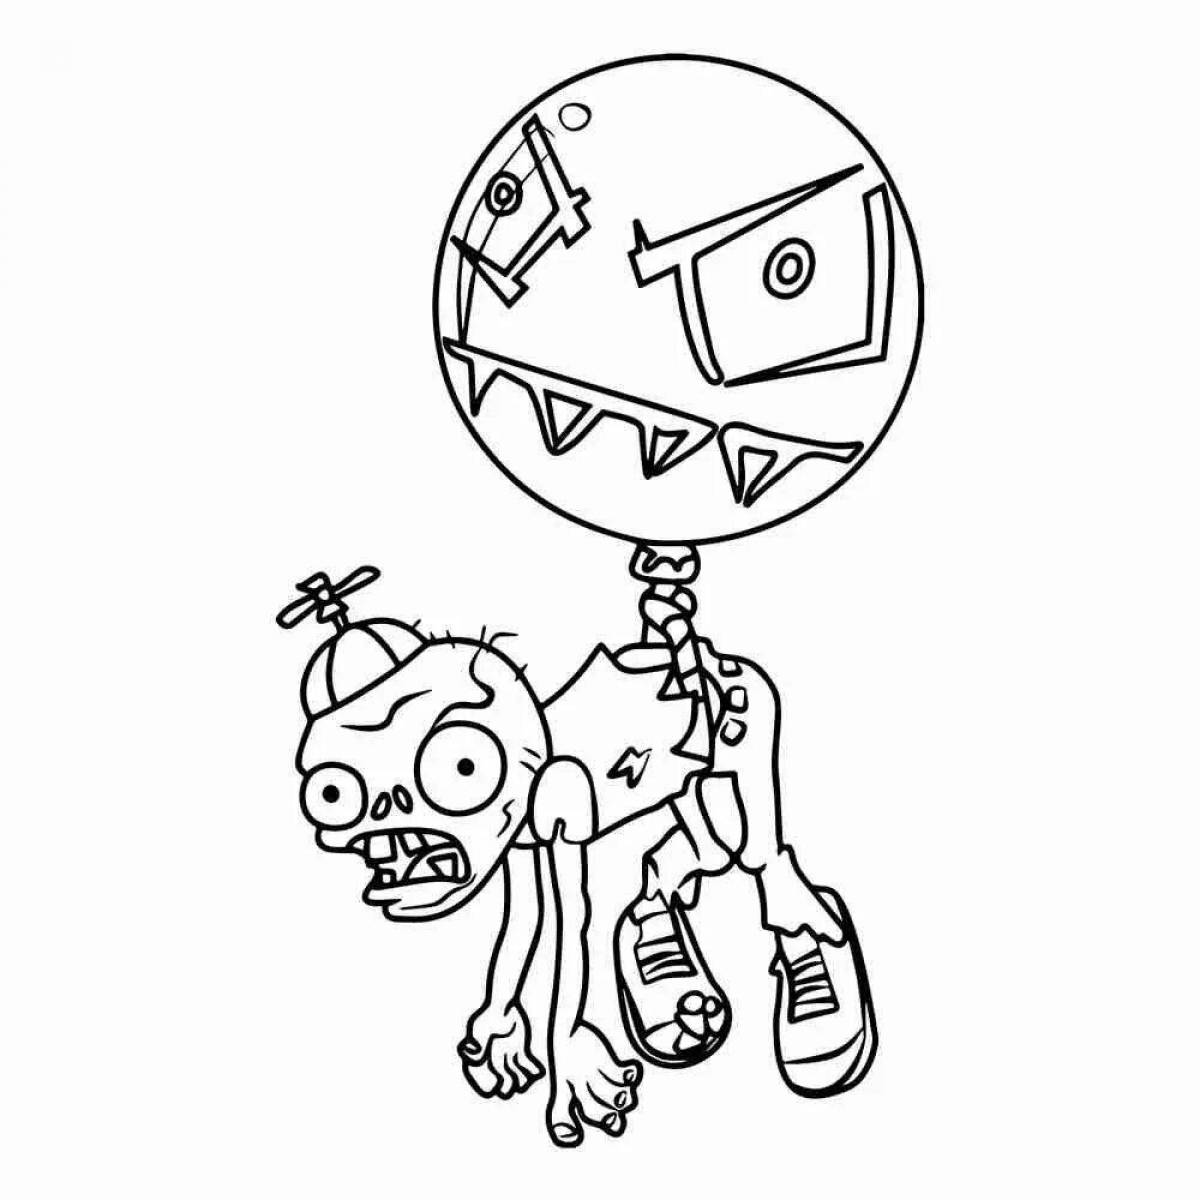 Disgusting zombie planet coloring book